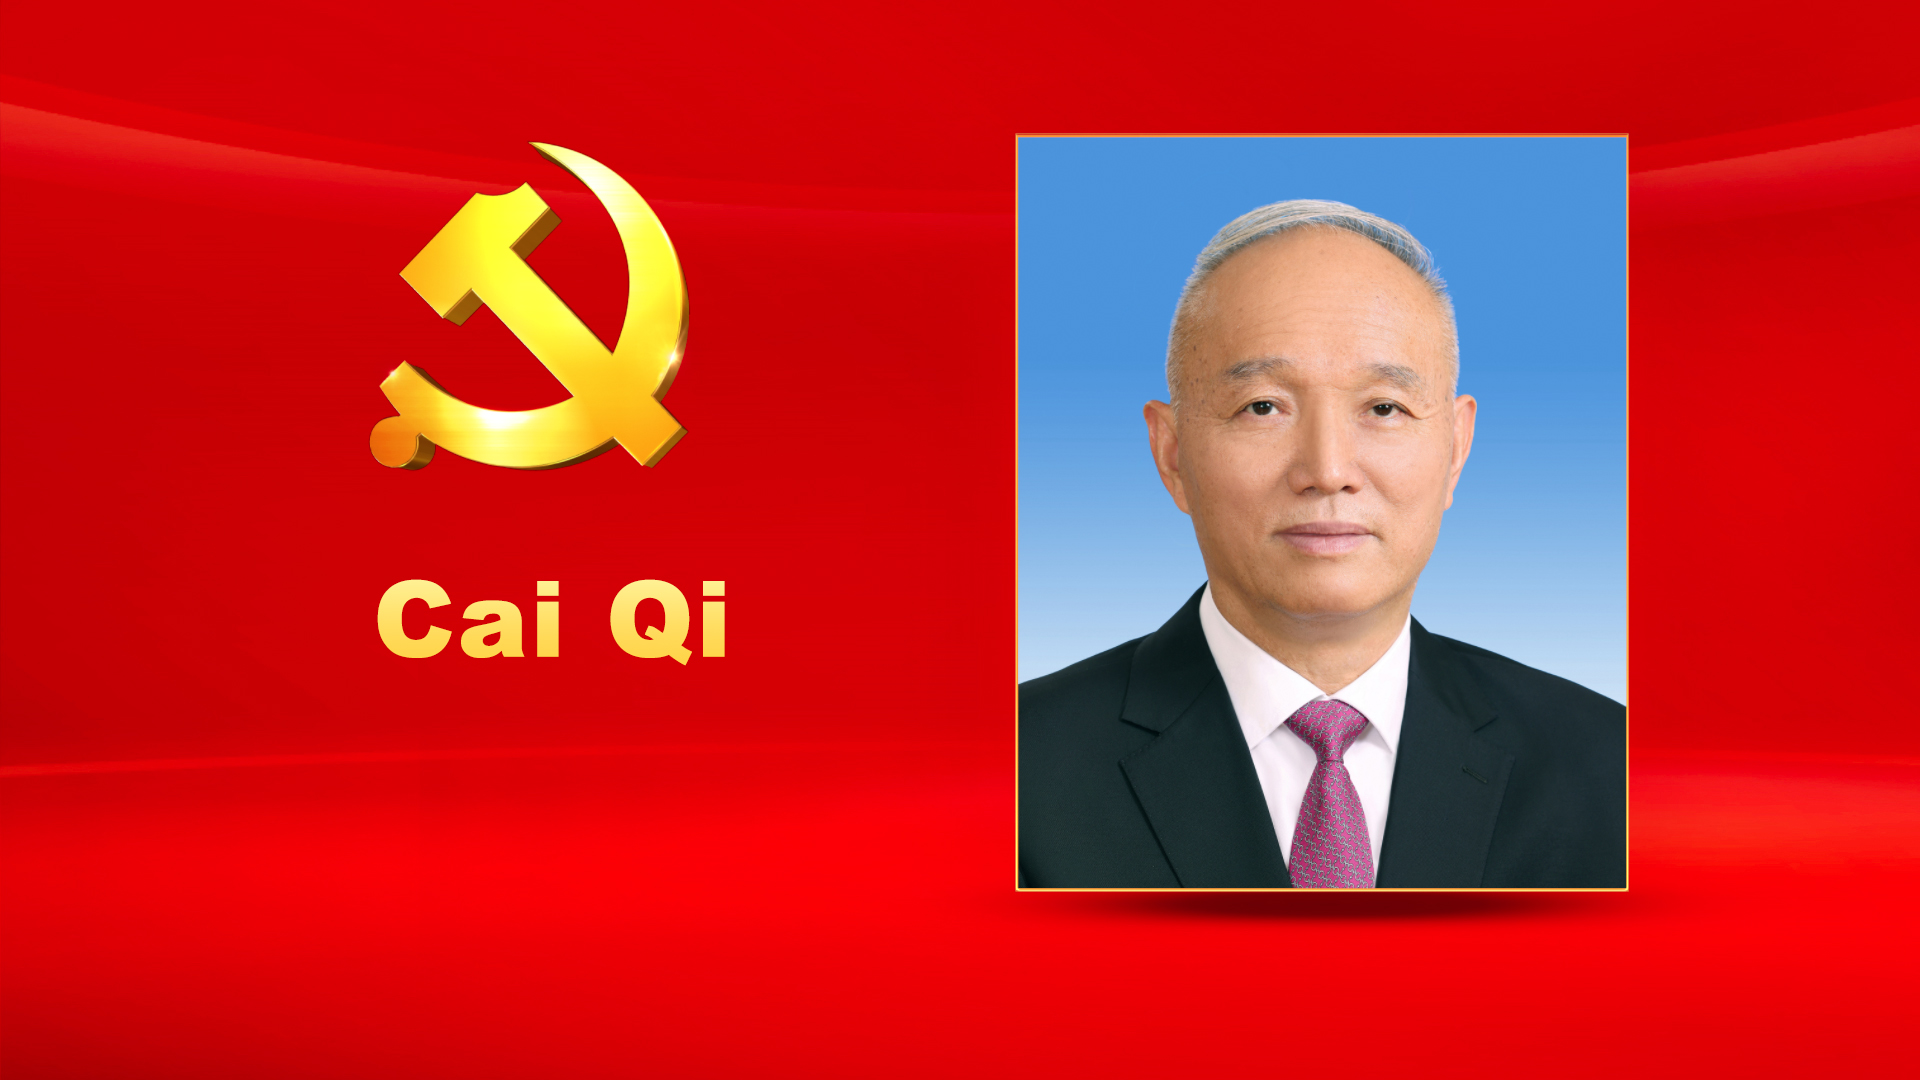 Cai Qi, male, Han ethnicity, was born in December 1955 and is from Youxi, Fujian Province. He began his first job in March 1973 and joined the Communist Party of China (CPC) in August 1975. Cai graduated from School of Economics and Law, Fujian Normal University where he completed an in-service graduate program in political economy. He holds a Doctor of Economics degree. Cai is currently a member of the Standing Committee of the CPC Central Committee Political Bureau, a member of the CPC Central Committee Secretariat, Secretary of the CPC Beijing Municipal Committee, and Chairman and Leading Party Members Group Secretary of the Organizing Committee for the 2022 Beijing Winter Olympic Games and Paralympic Games.